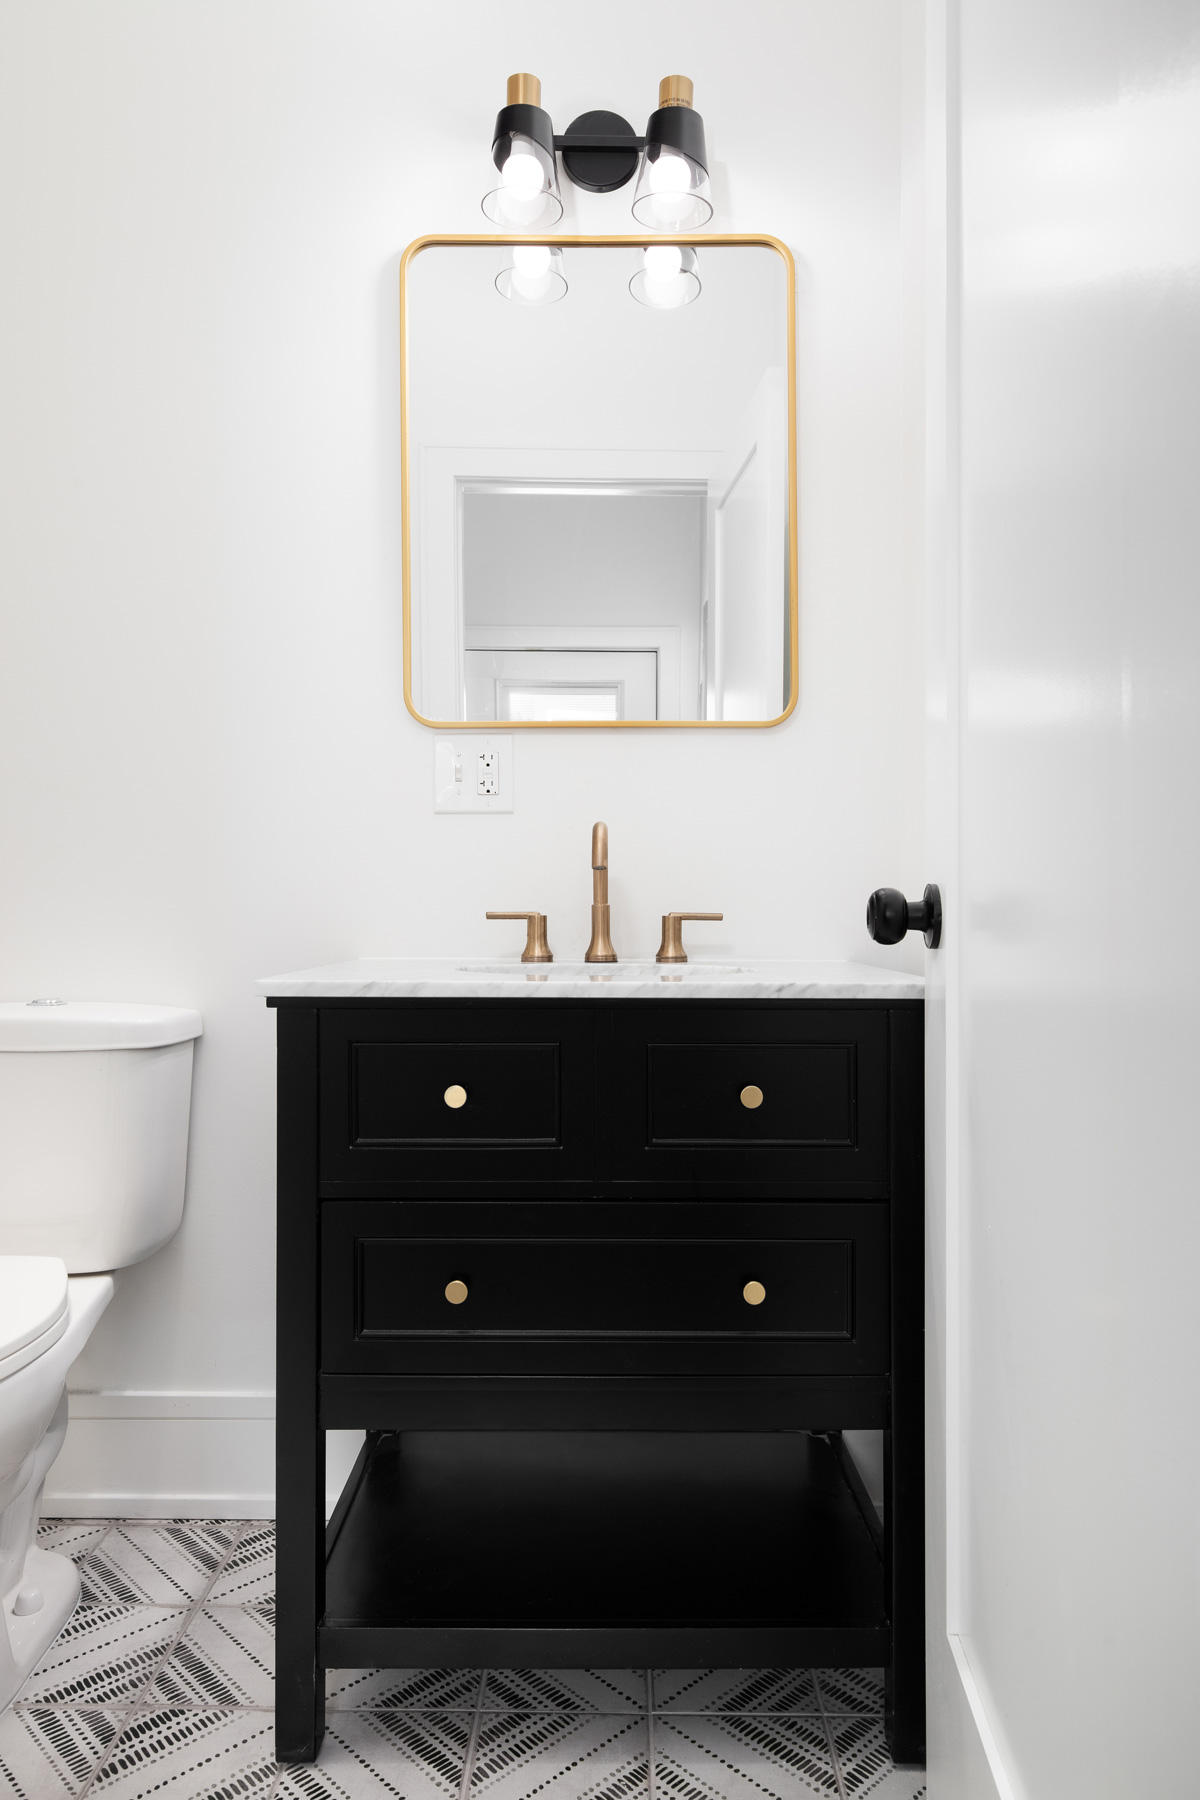 A bathroom with a black vanity, gold faucet and mirror, and a mosaic tiled floor.